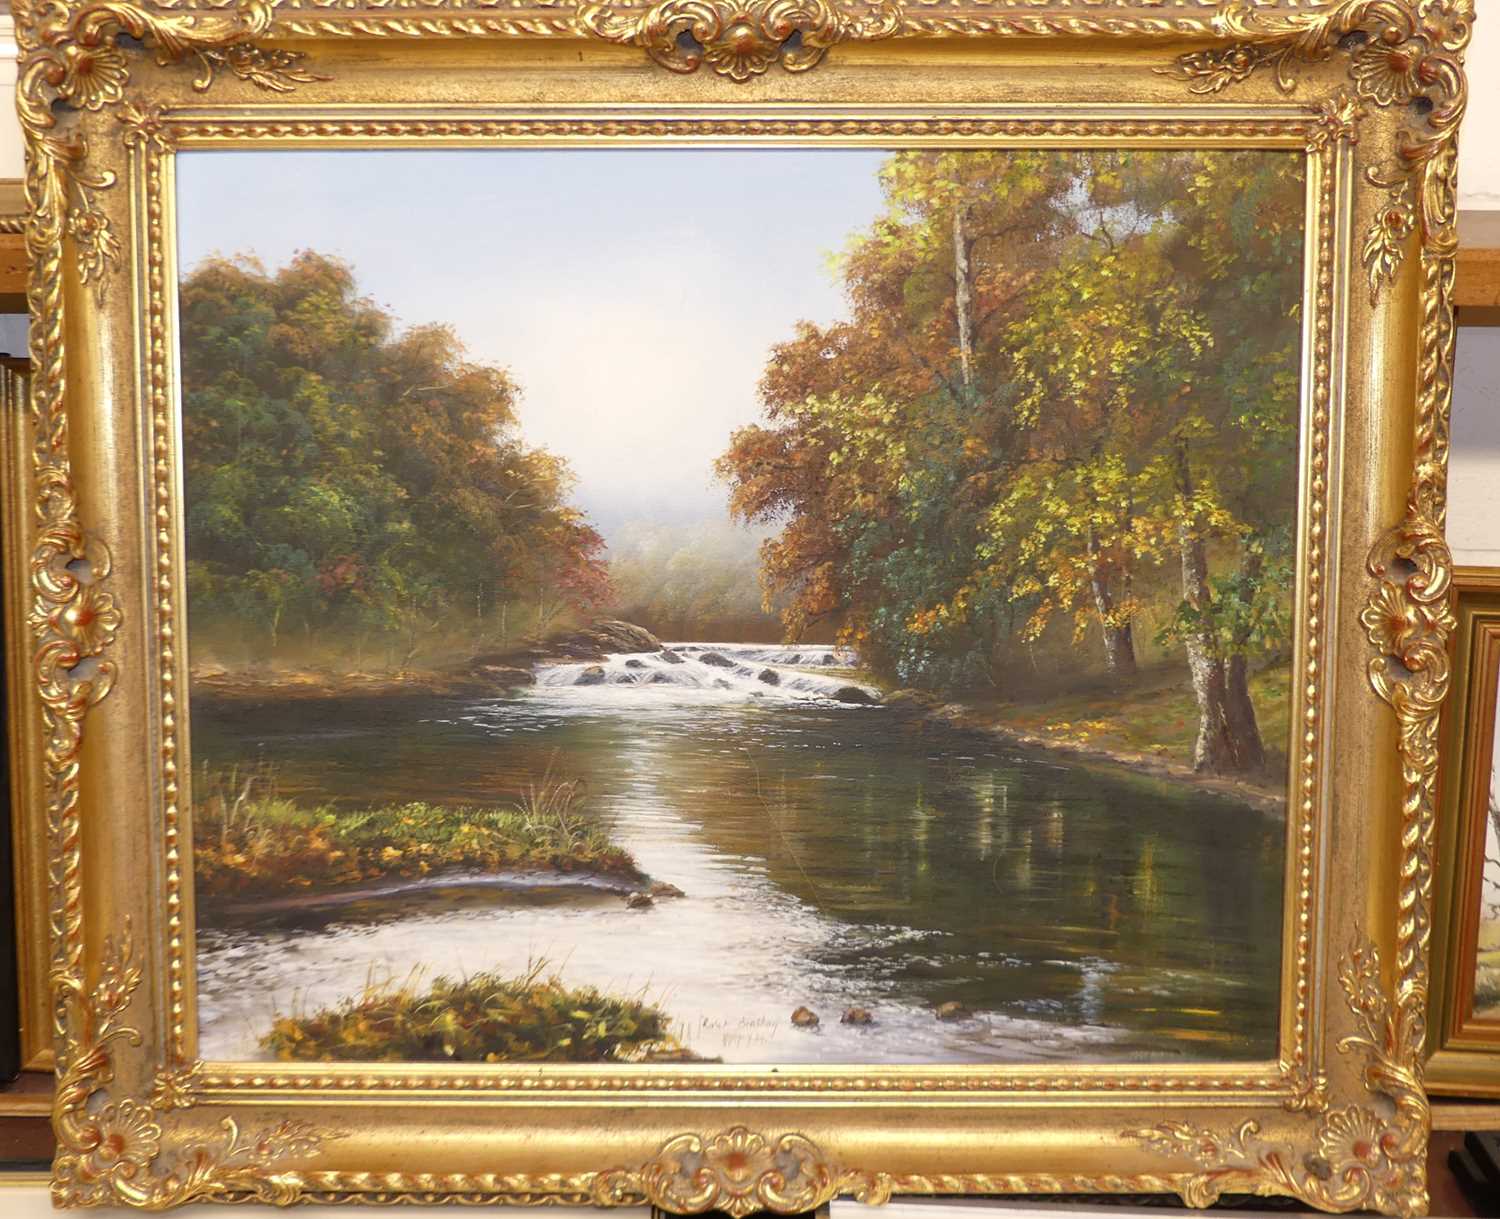 Harley - River Brathay, oil on canvas, signed, titled and dated '84 lower centre, 50 x 60cm